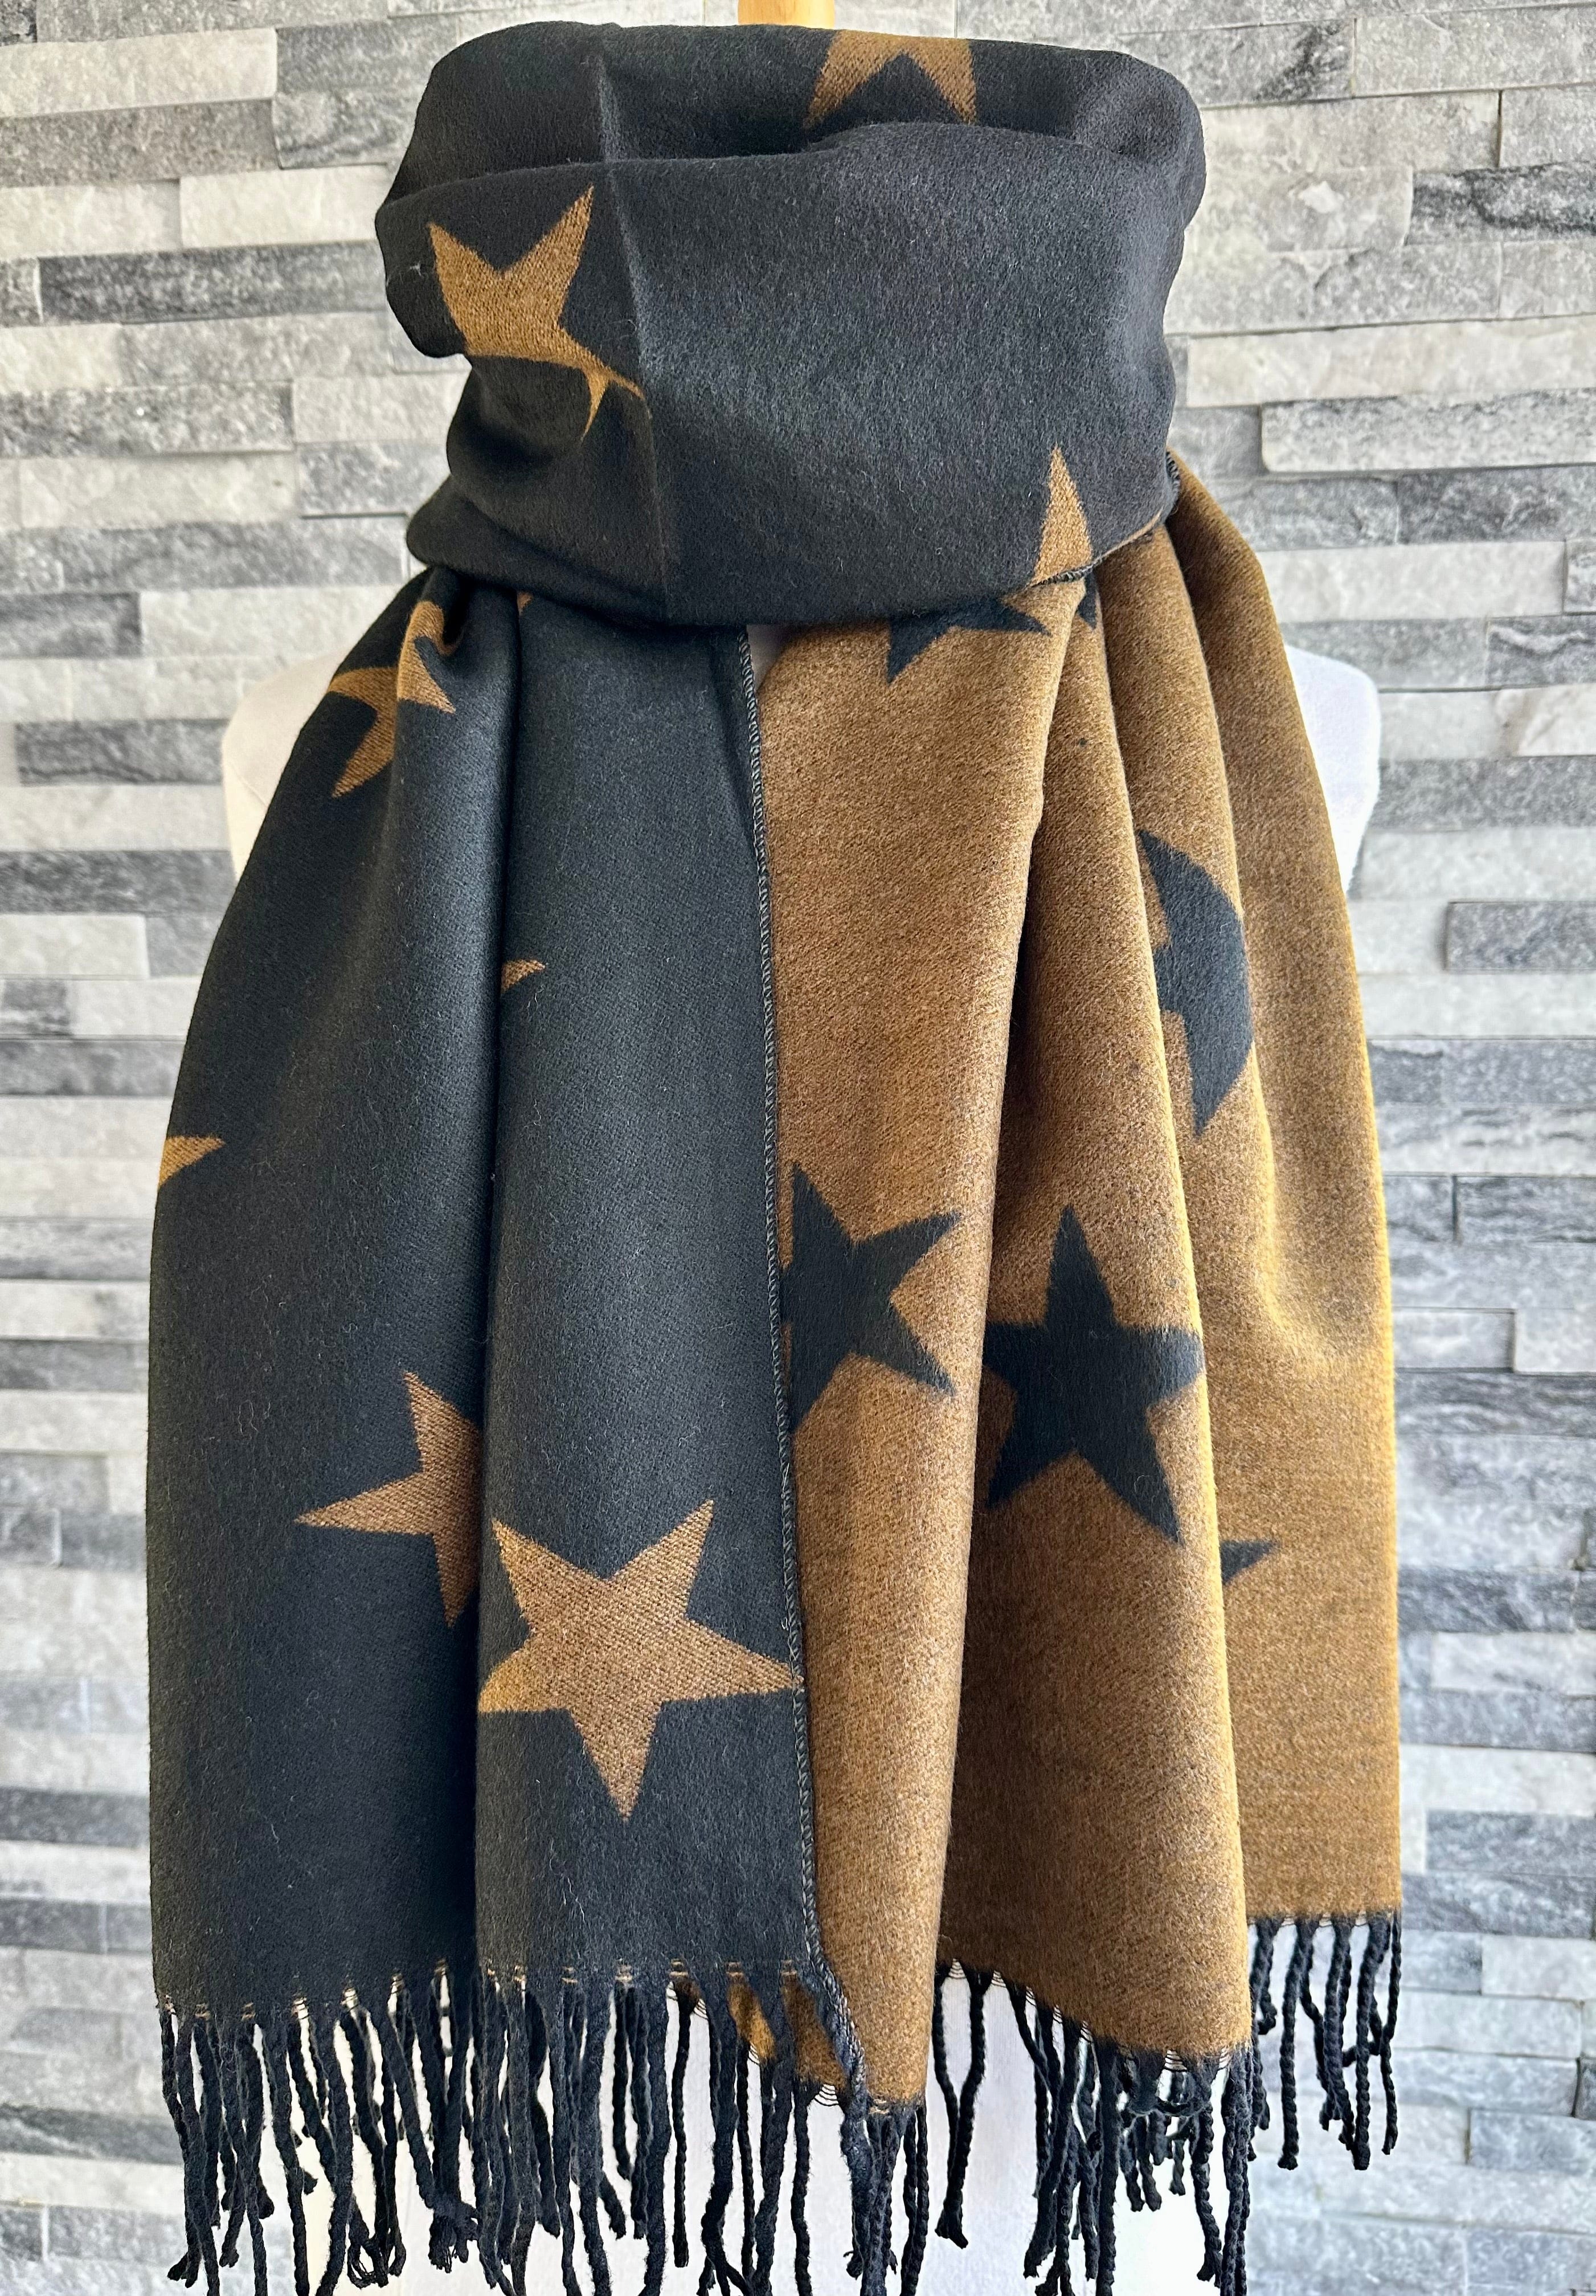 lusciousscarves Reversible Black and Brown Stars Scarf/Shawl Cashmere Blend